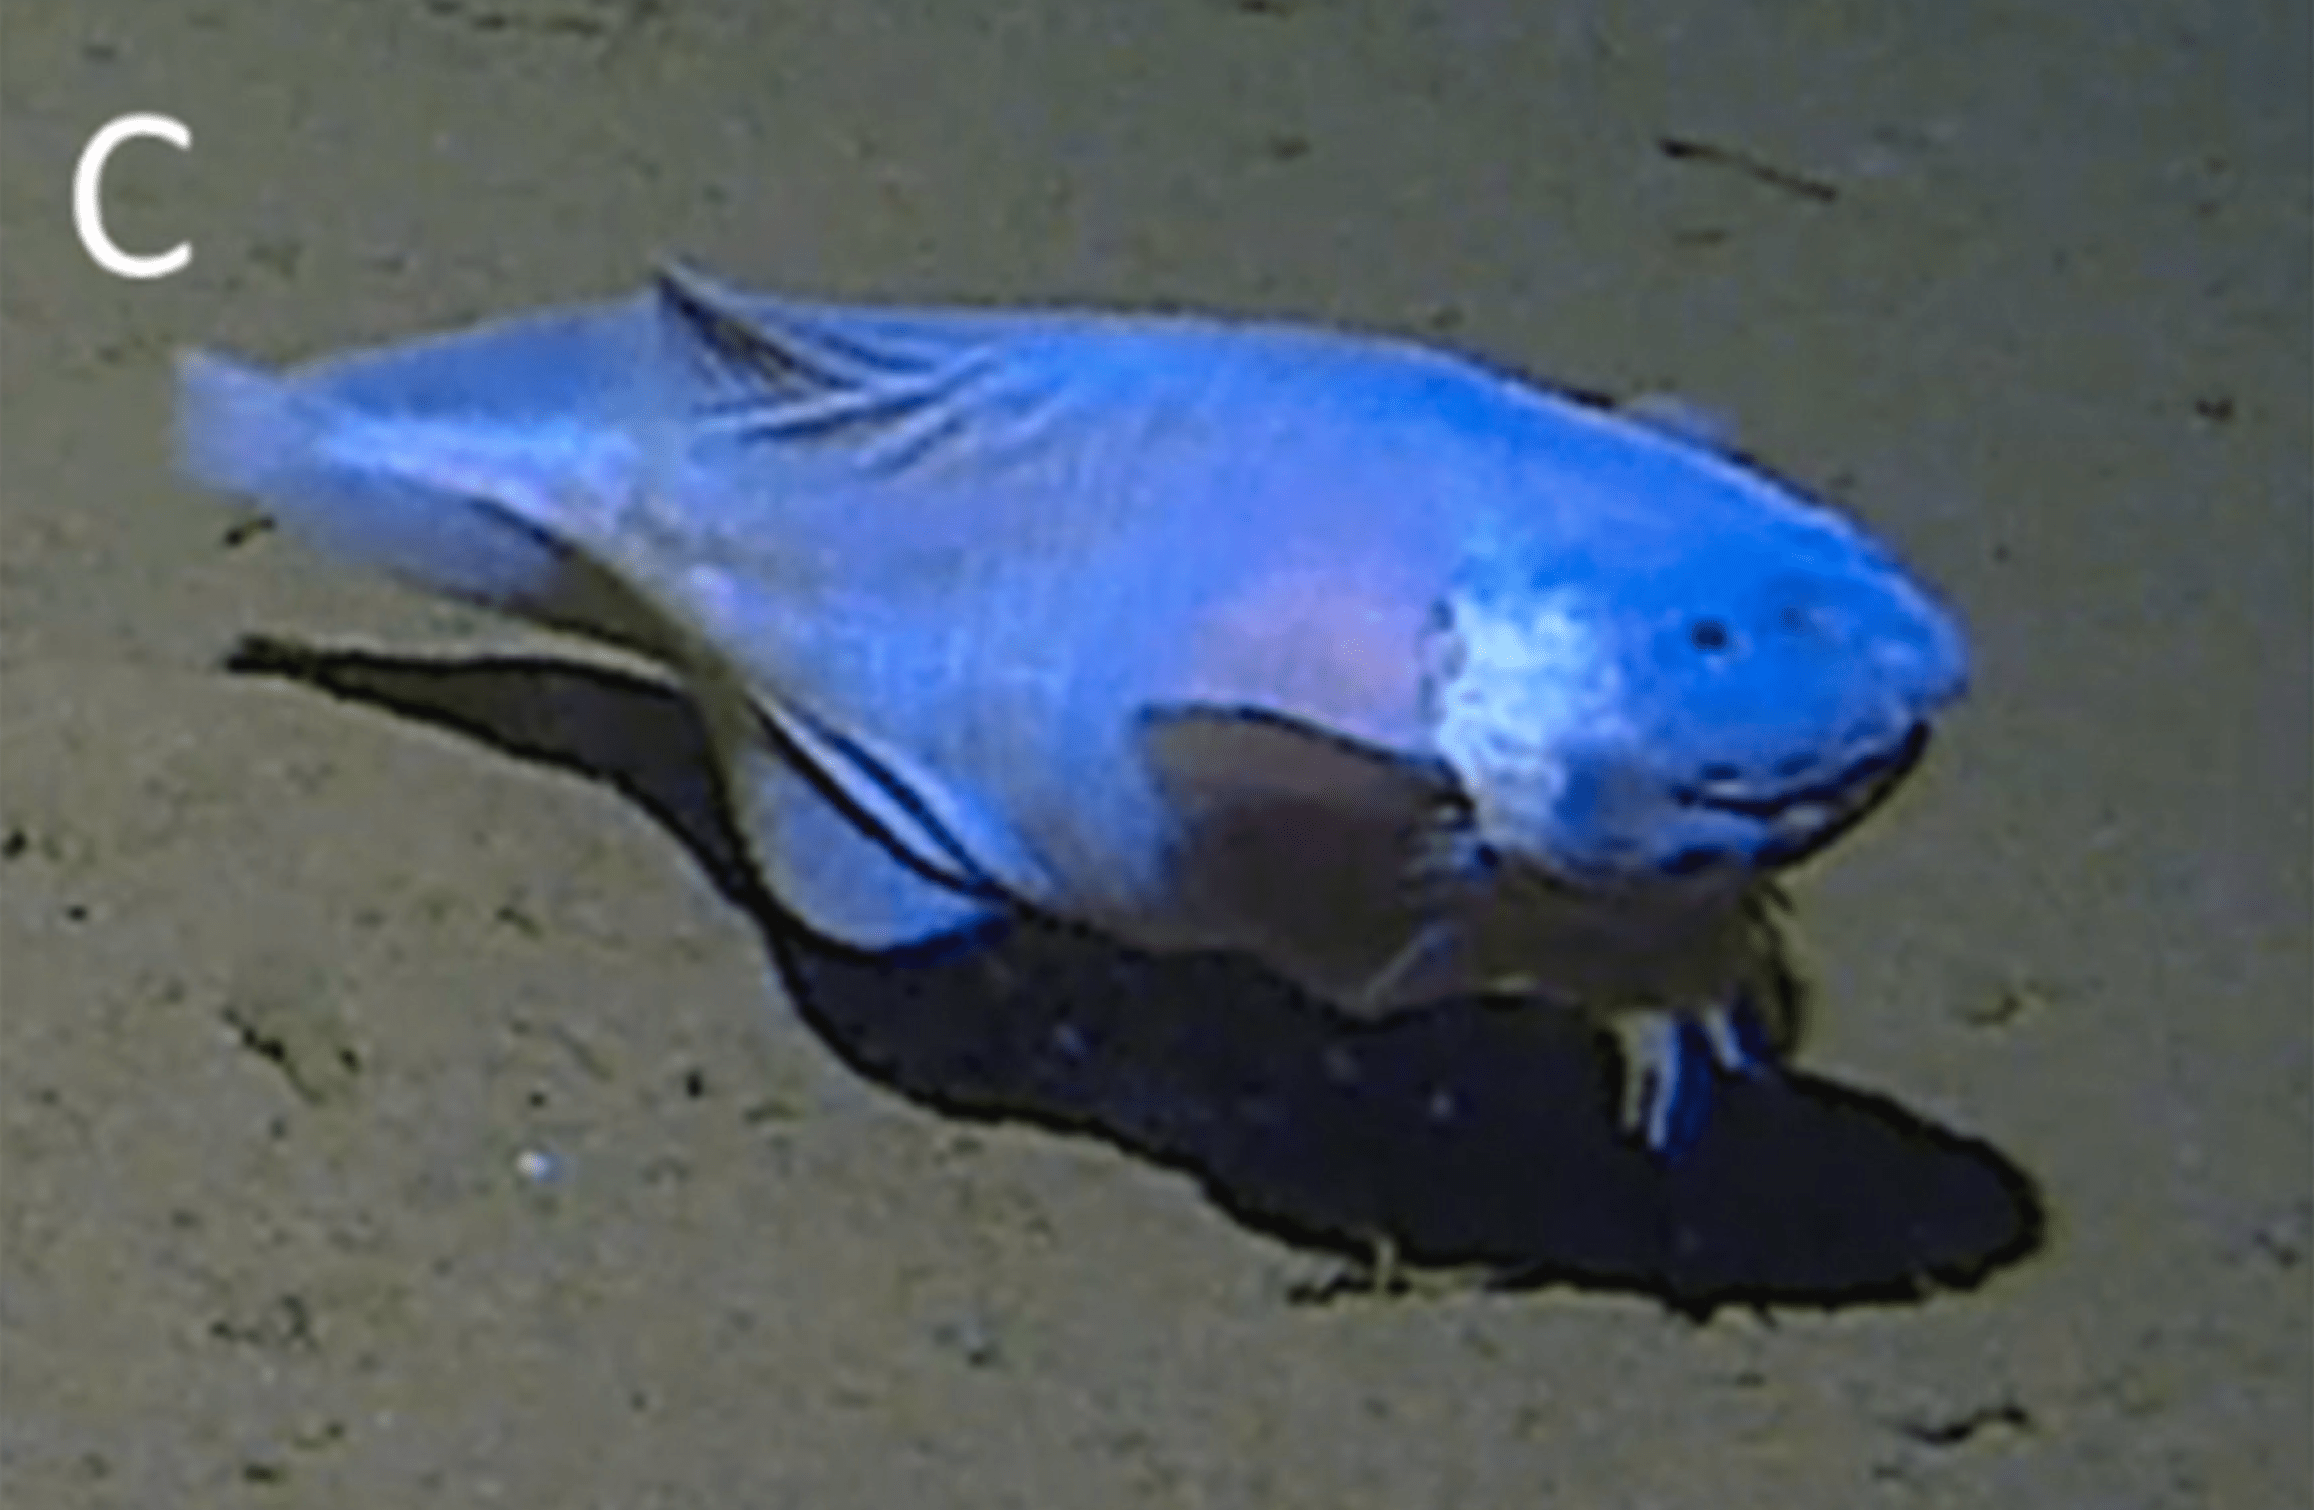 A very cute hadal snailfish that is blue and chunky and appears to be smiling